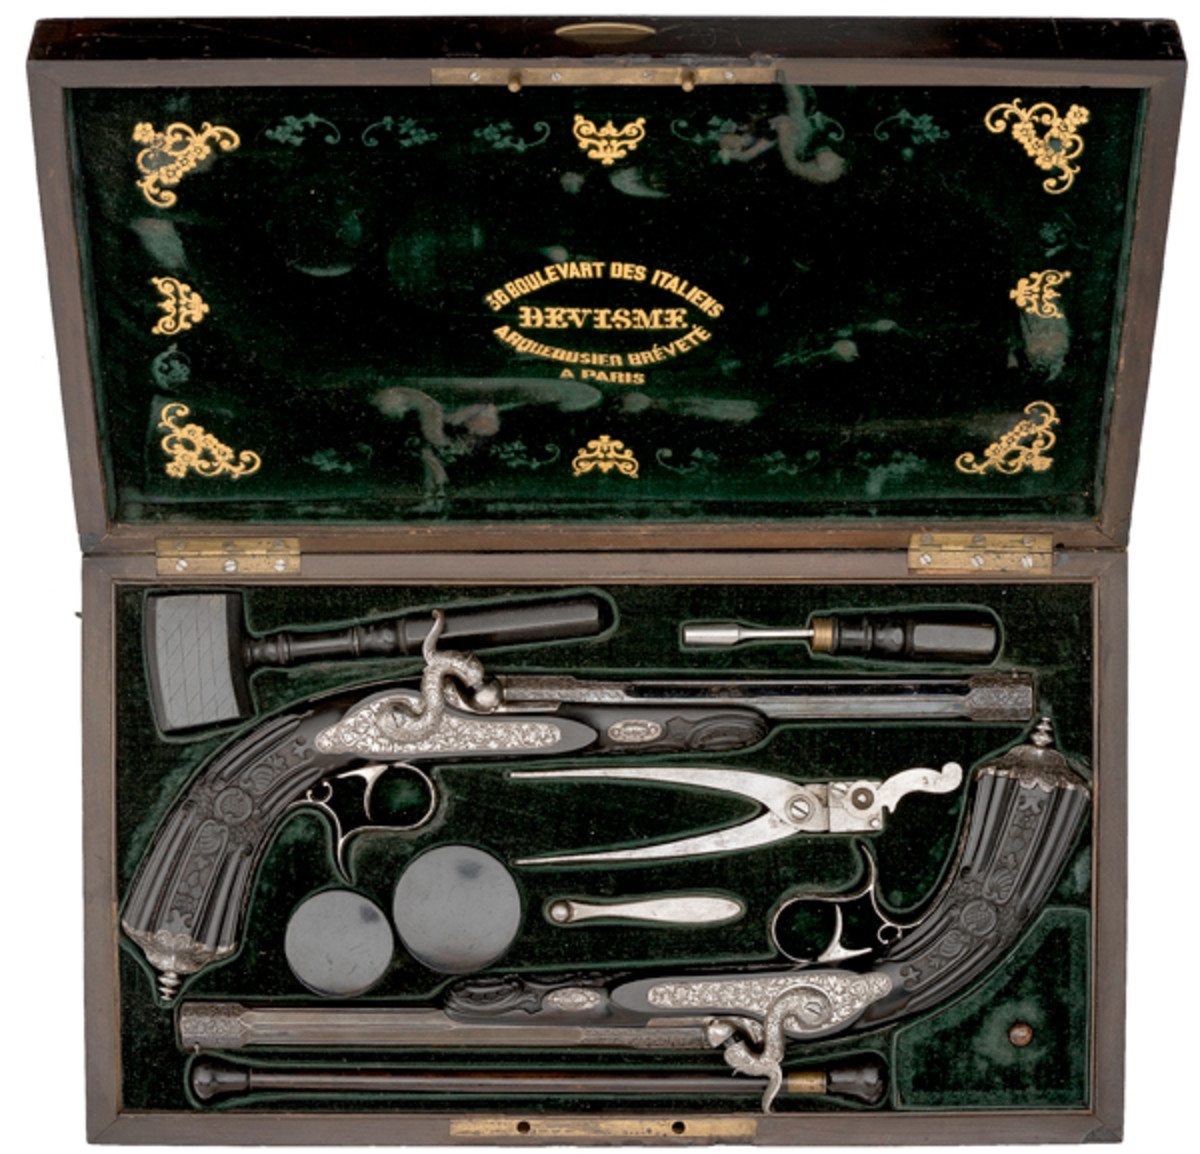 Cased Pair of Percussion Target Pistols by Devisme of Paris - sold for $16,100.